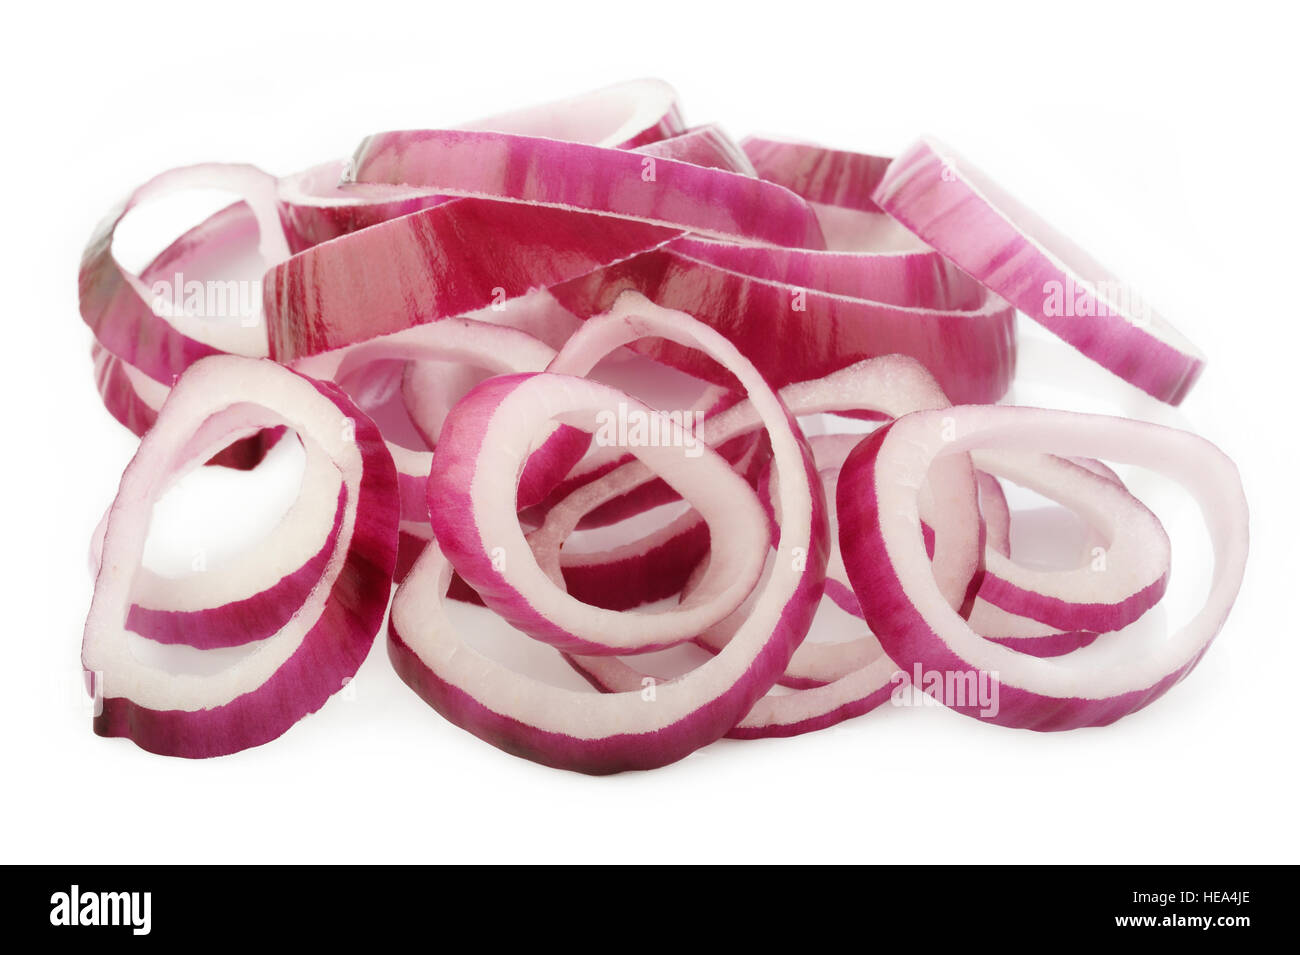 Sliced red onion on white background Stock Photo